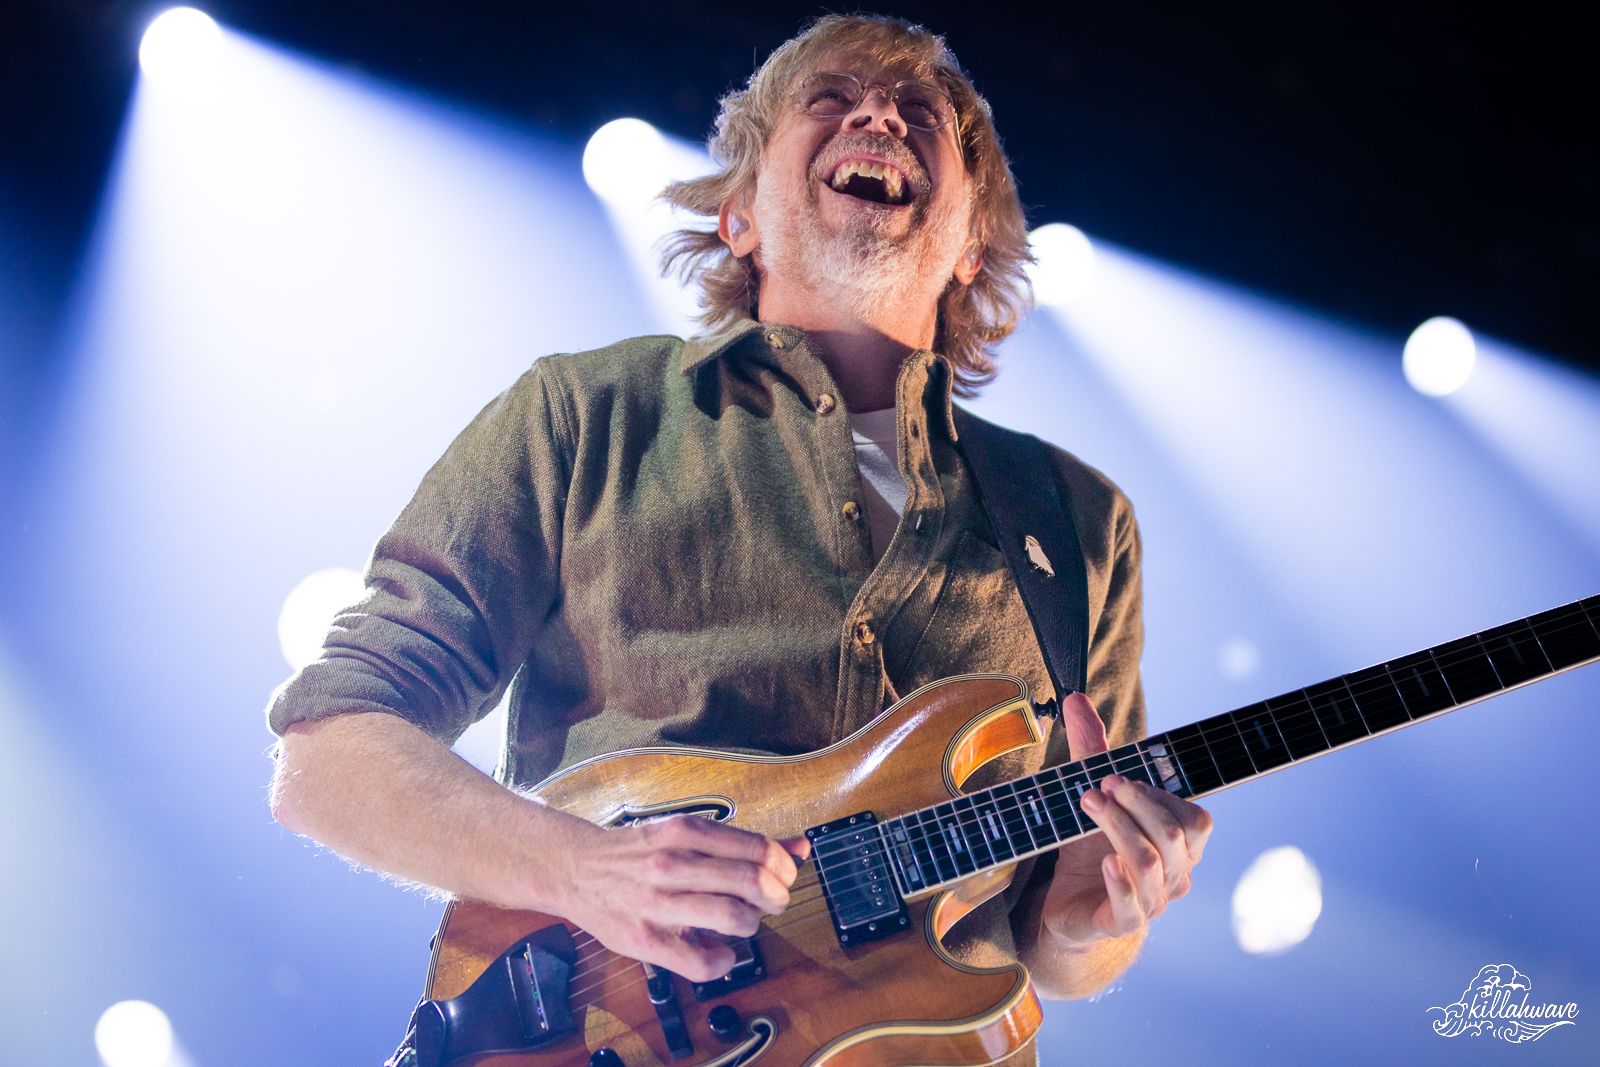 Trey Anastasio Band and Goose Conclude Their Joint Tour With Vigor at Santander Arena